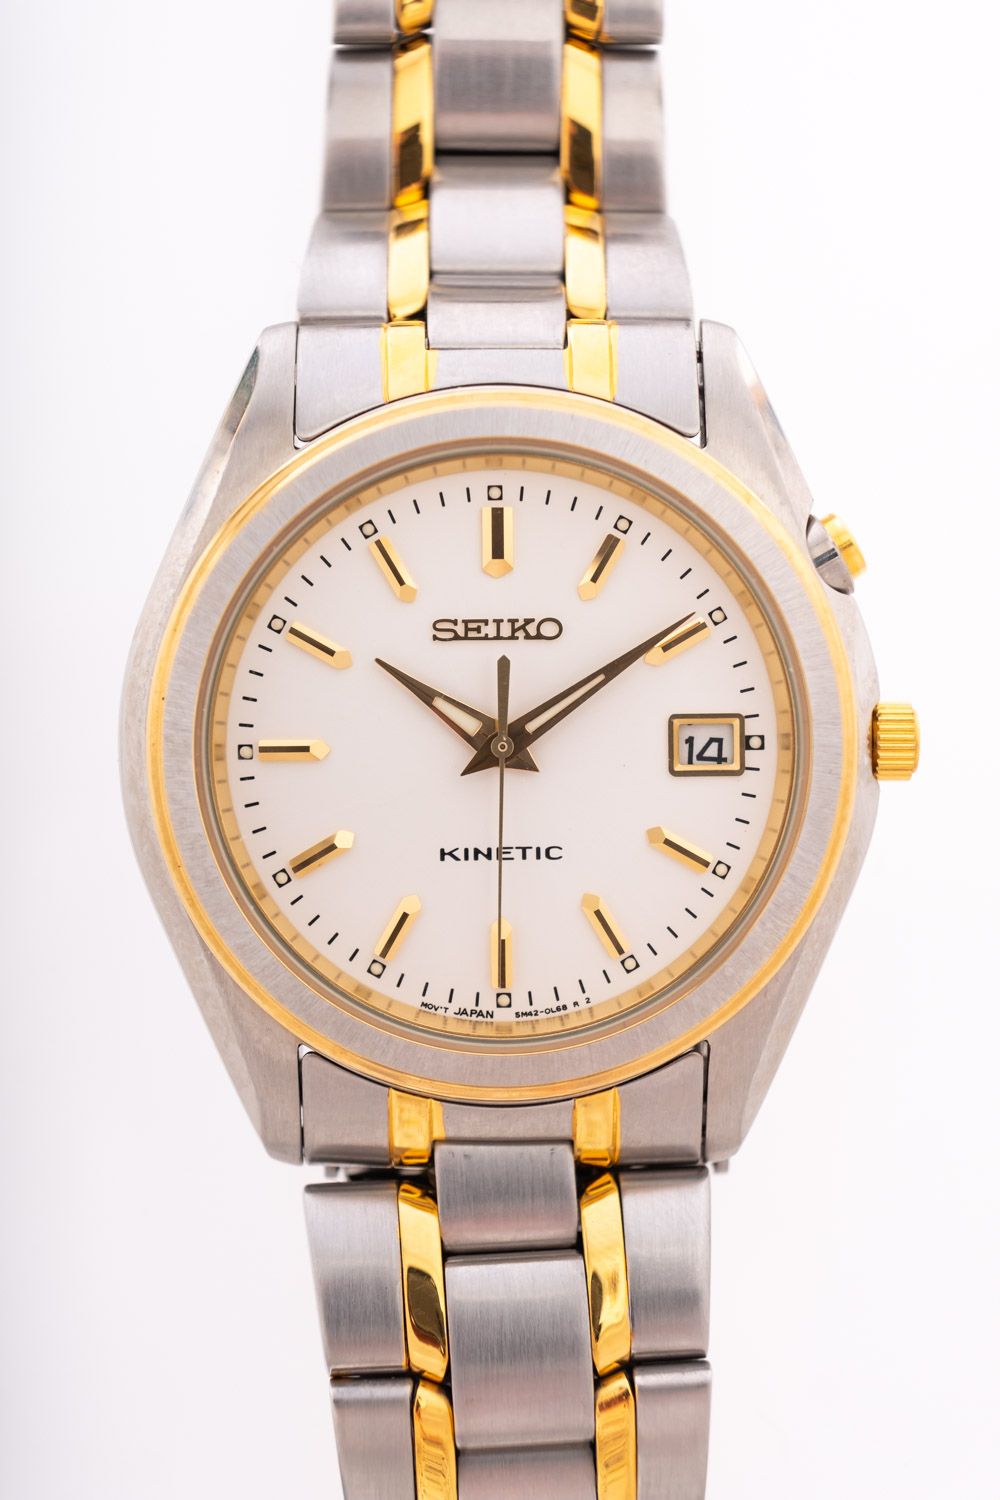 Seiko Kinetic a gentleman's wristwatch the cream dial with raised numerals and signed Seiko Kinetic,